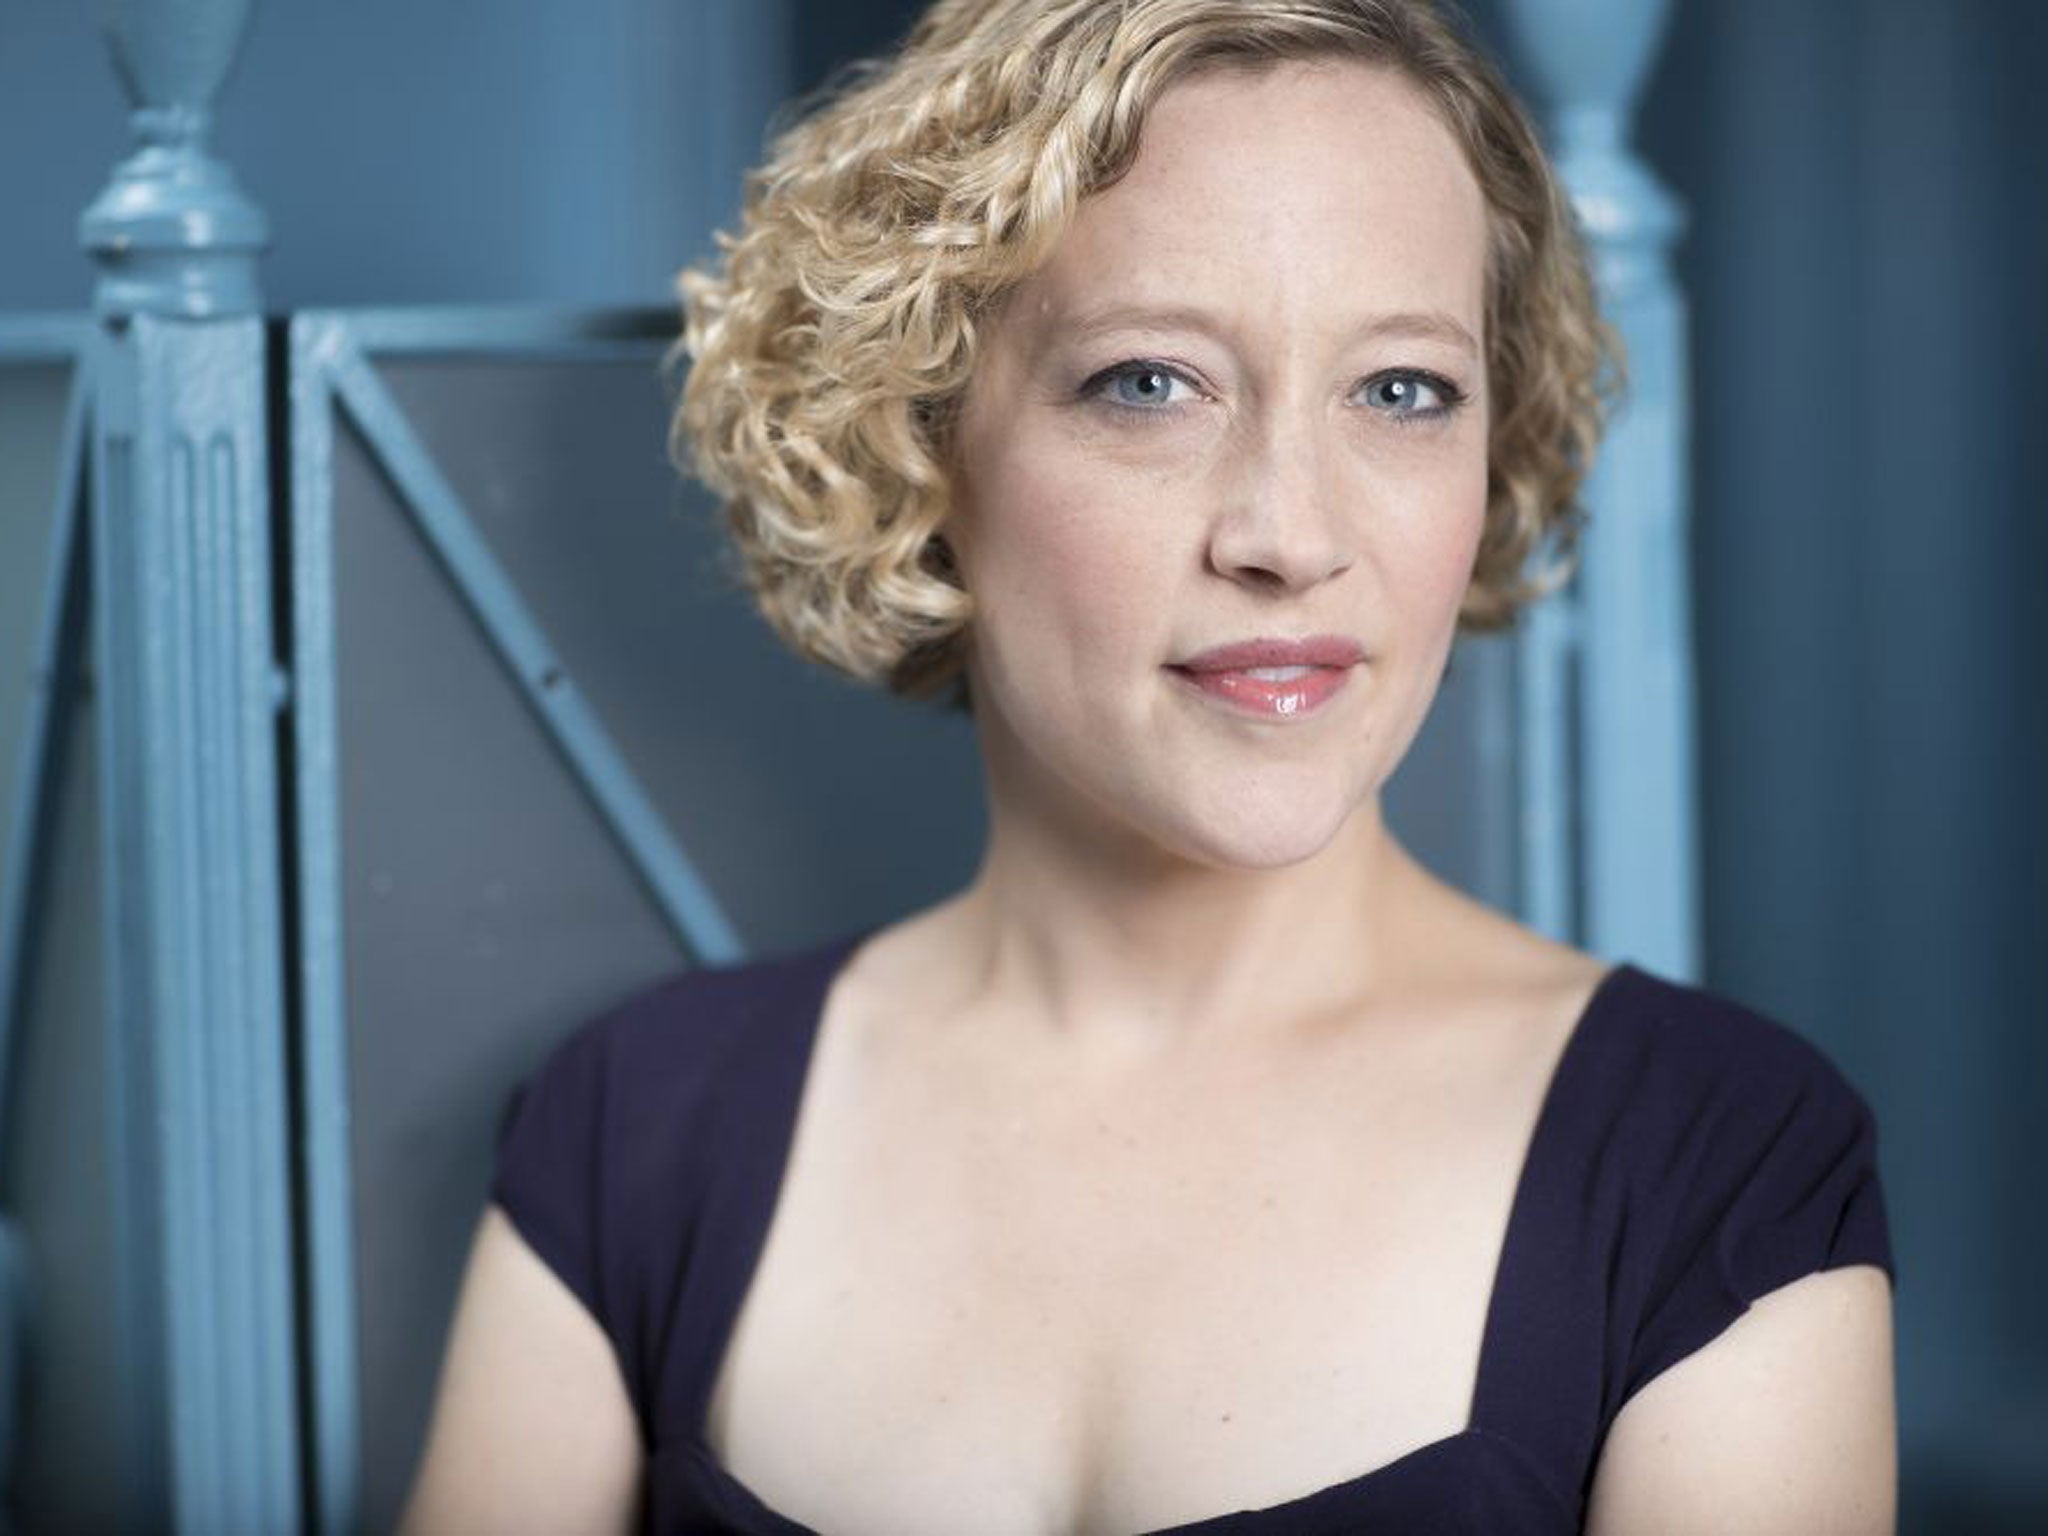 Cathy Newman says getting too heavy handed with people like John Inverdale can lead to a counter-productive ‘battle of the sexes’